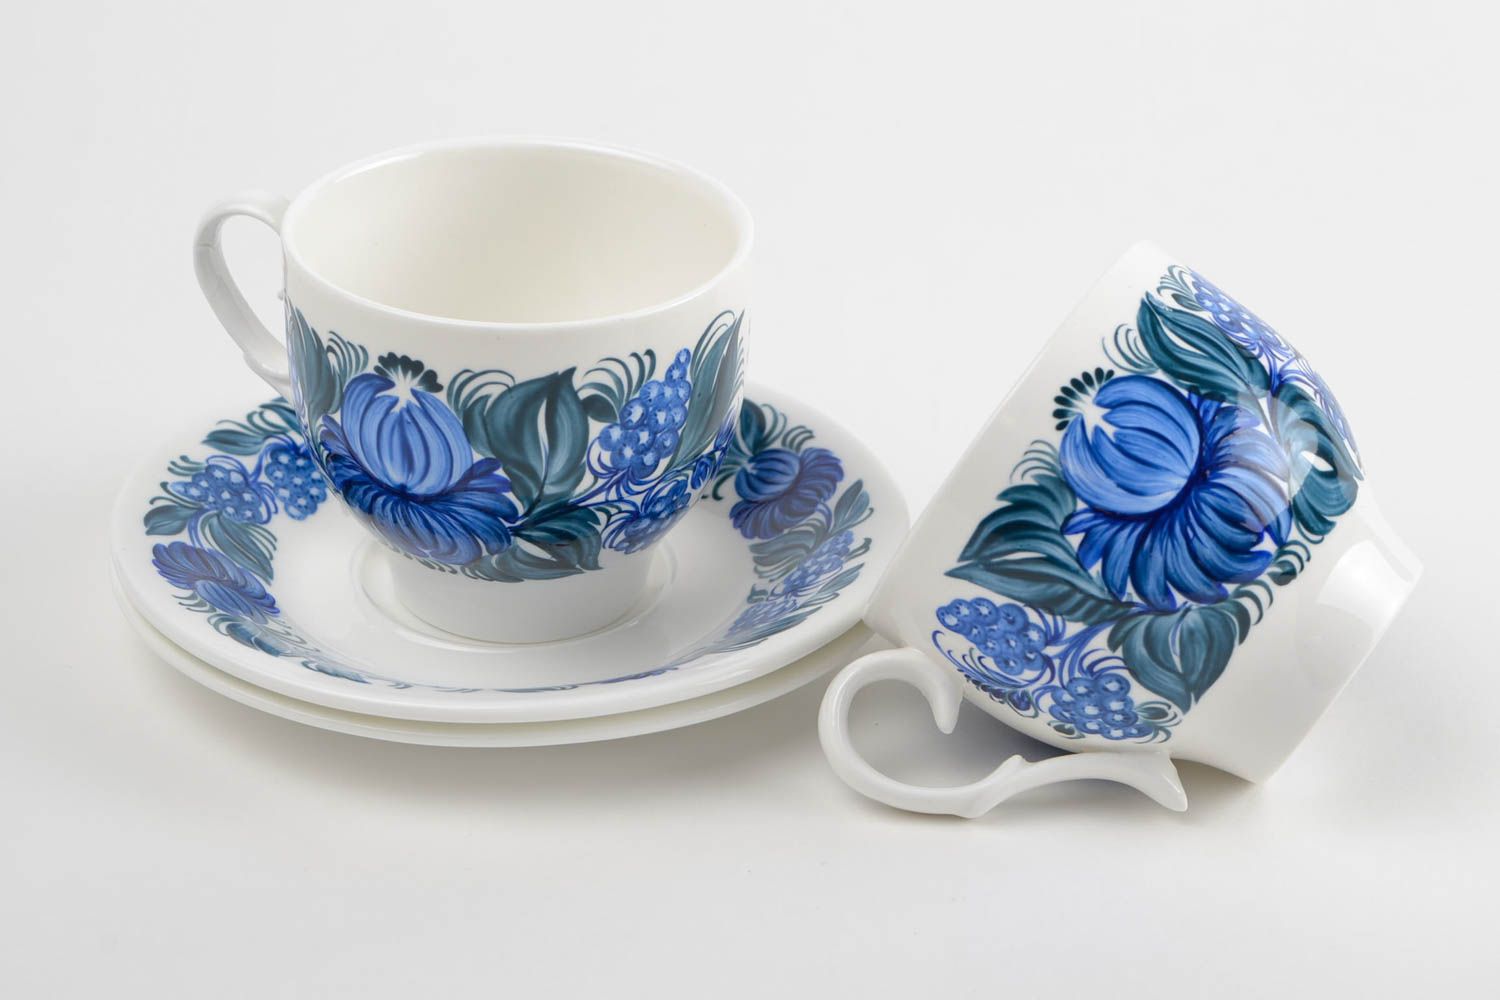 Set of two porcelain white and blue 5 oz tea cups and saucers with floral pattern photo 4